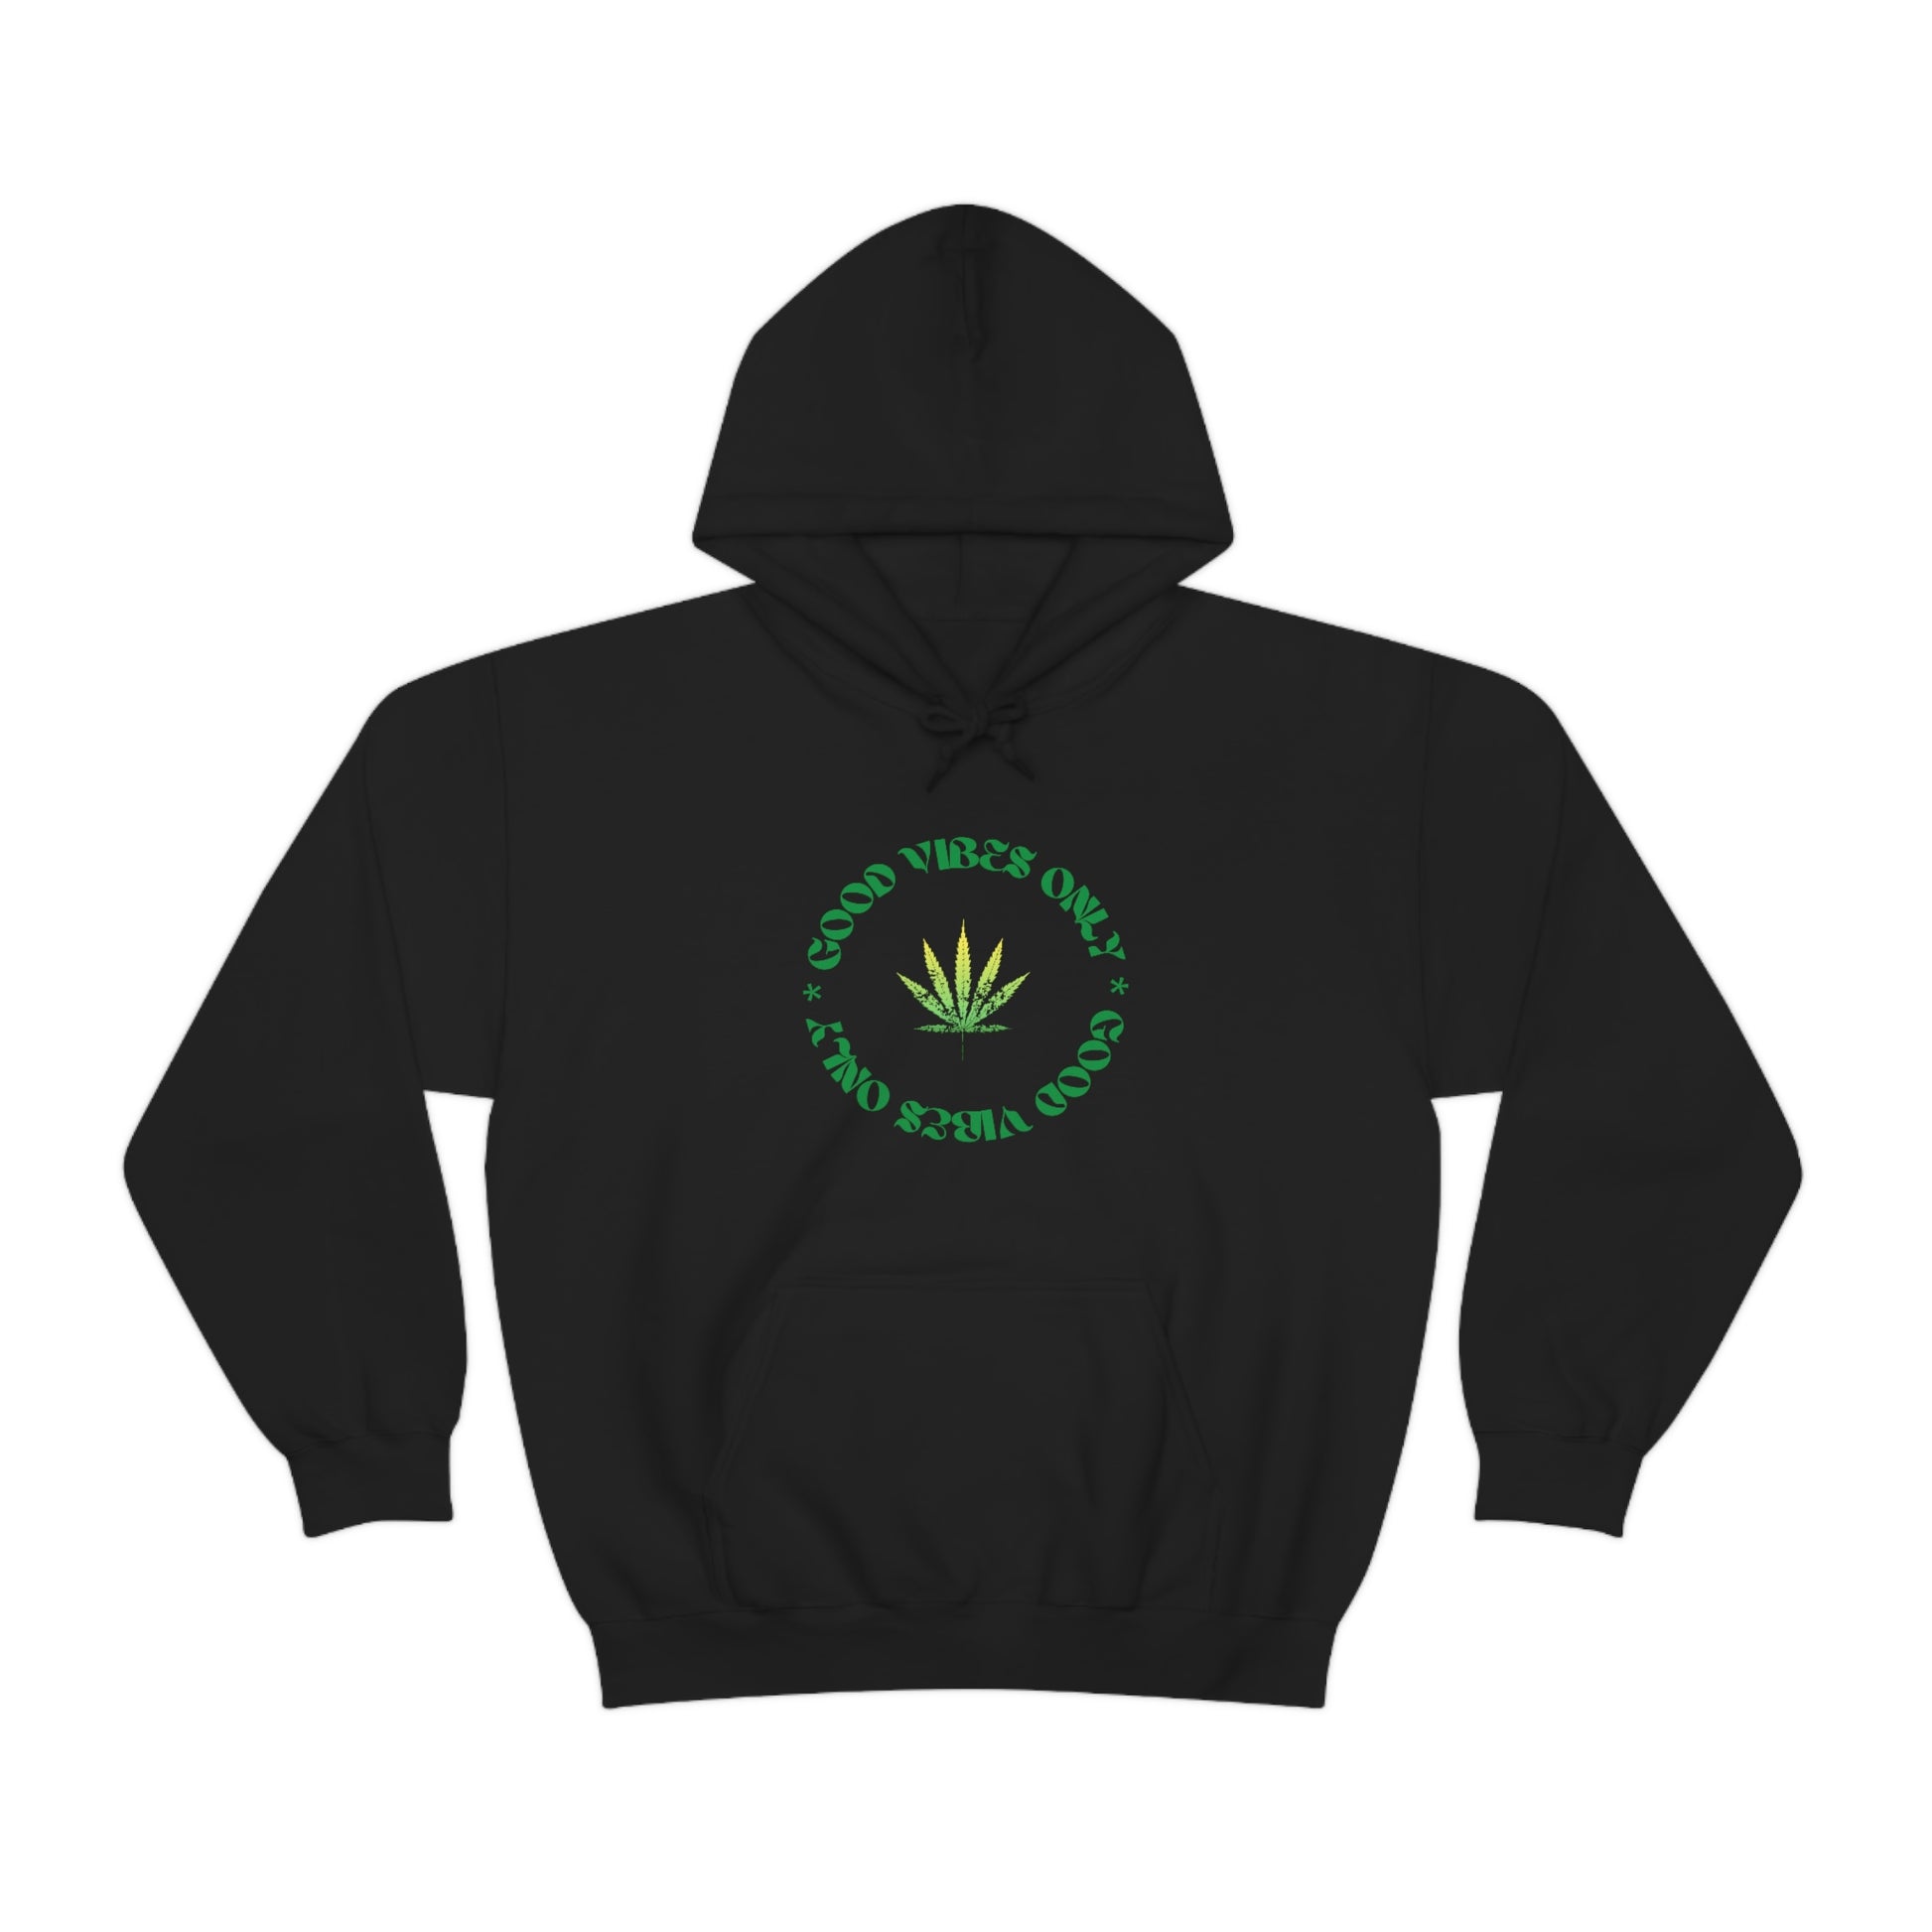 A black good vibes only weed sweater with a marijuana plant in the center